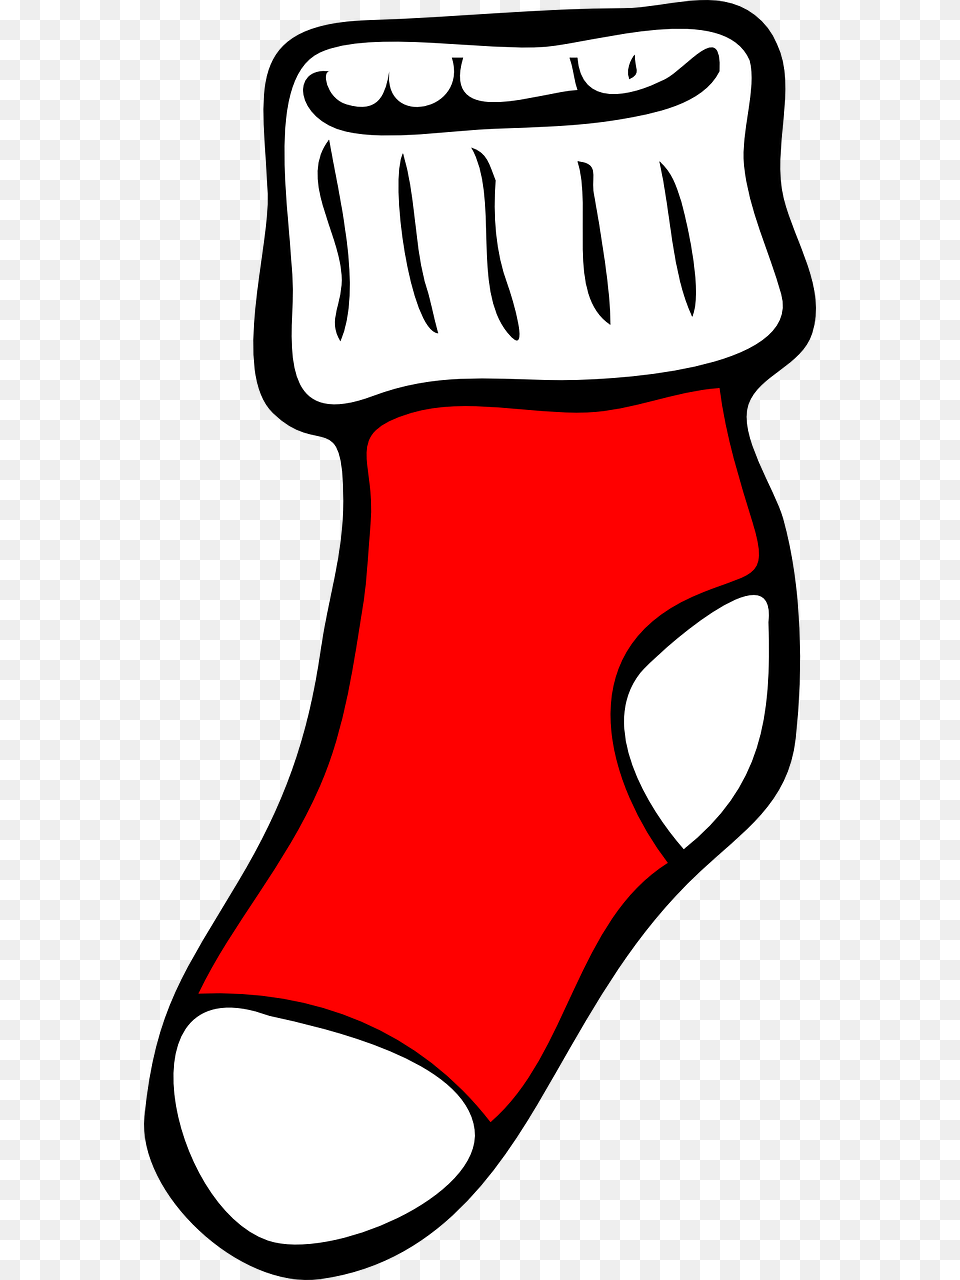 Socks Clipart, Clothing, Hosiery, Christmas, Christmas Decorations Free Transparent Png